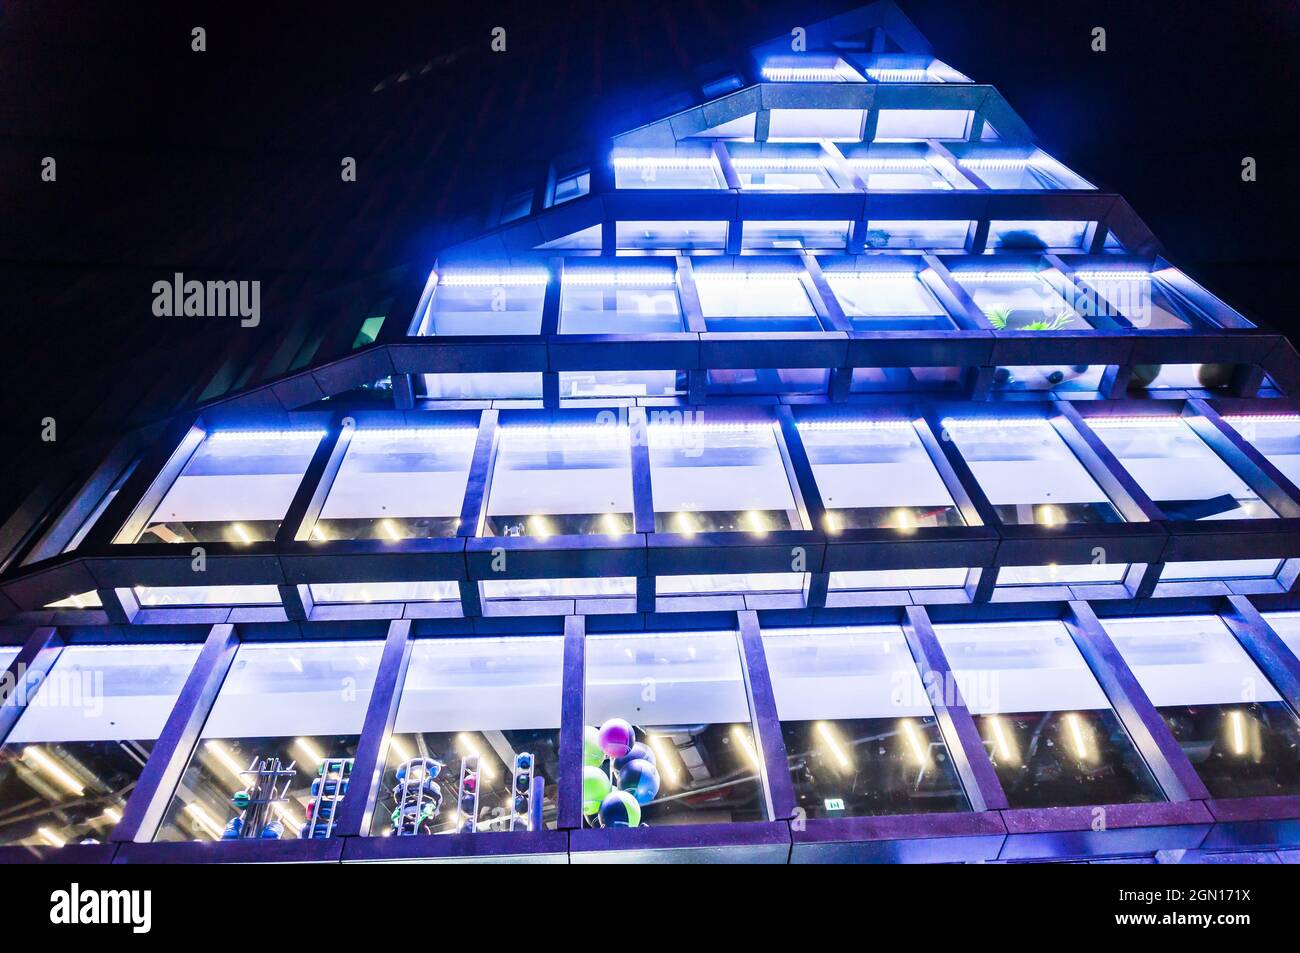 POZNAN, POLAND - Nov 01, 2018: A low angle shot of Baltyk office building by night located in Poznan, Poland Stock Photo